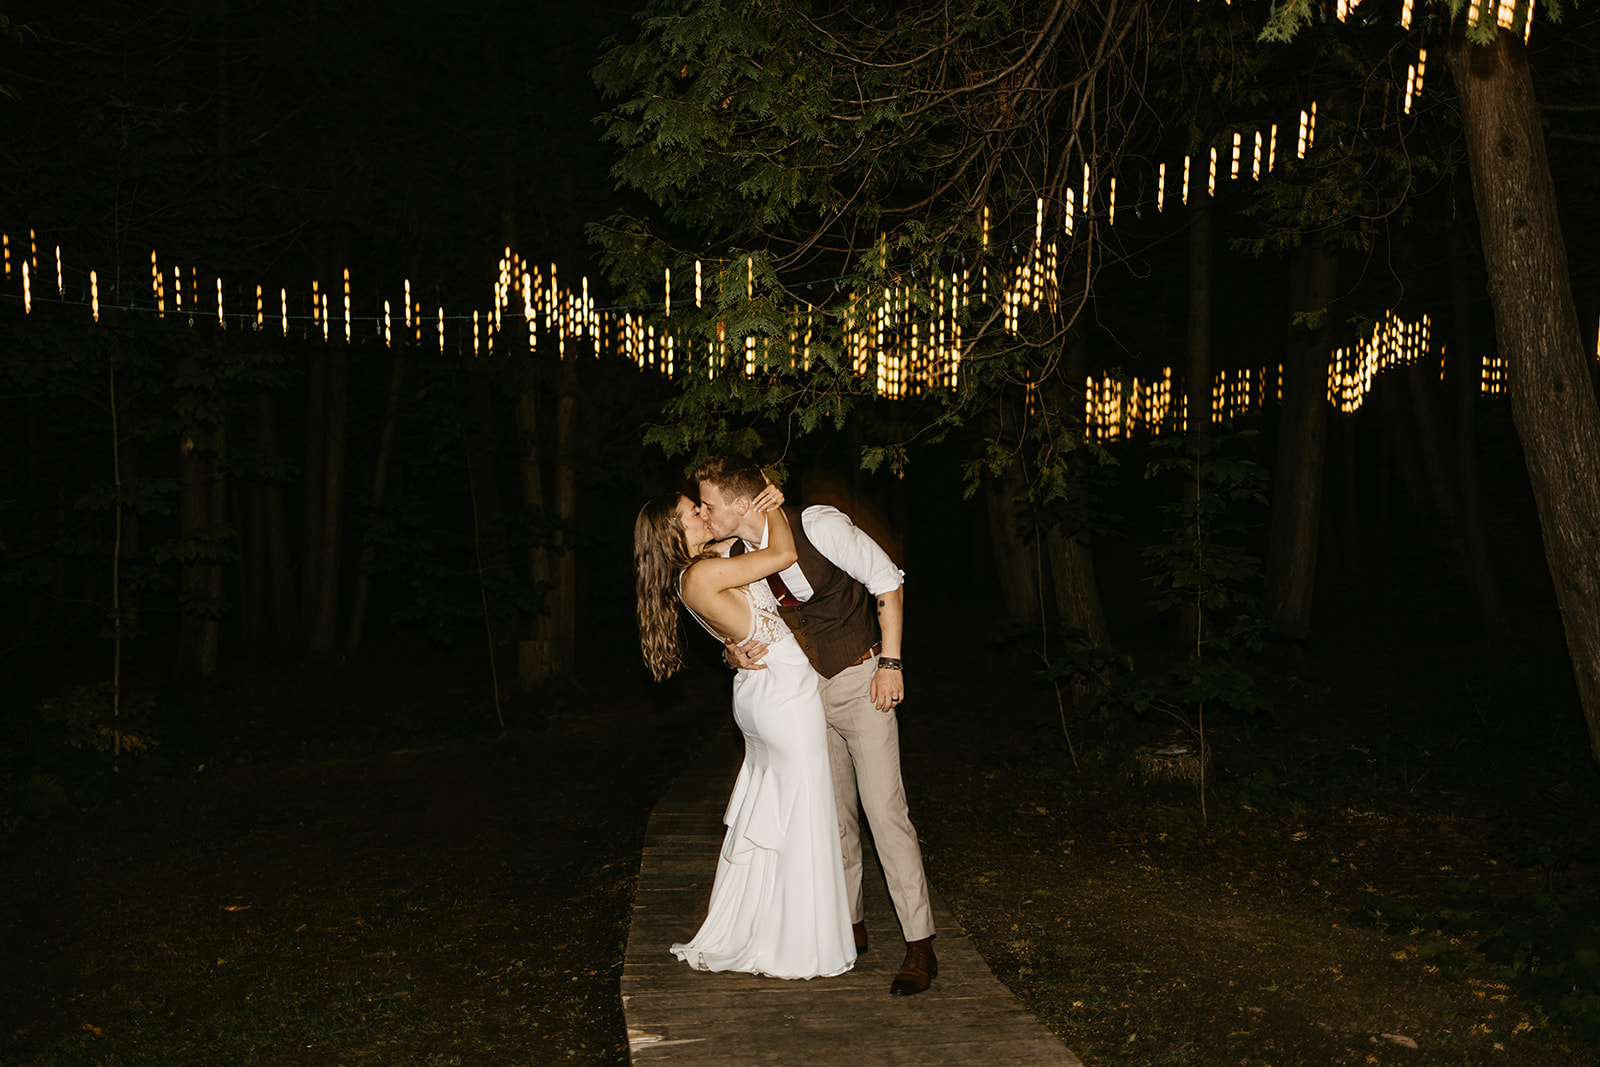 Maddie Lymburner and Chris Hartwig kiss under the fairy lights at their wedding reception